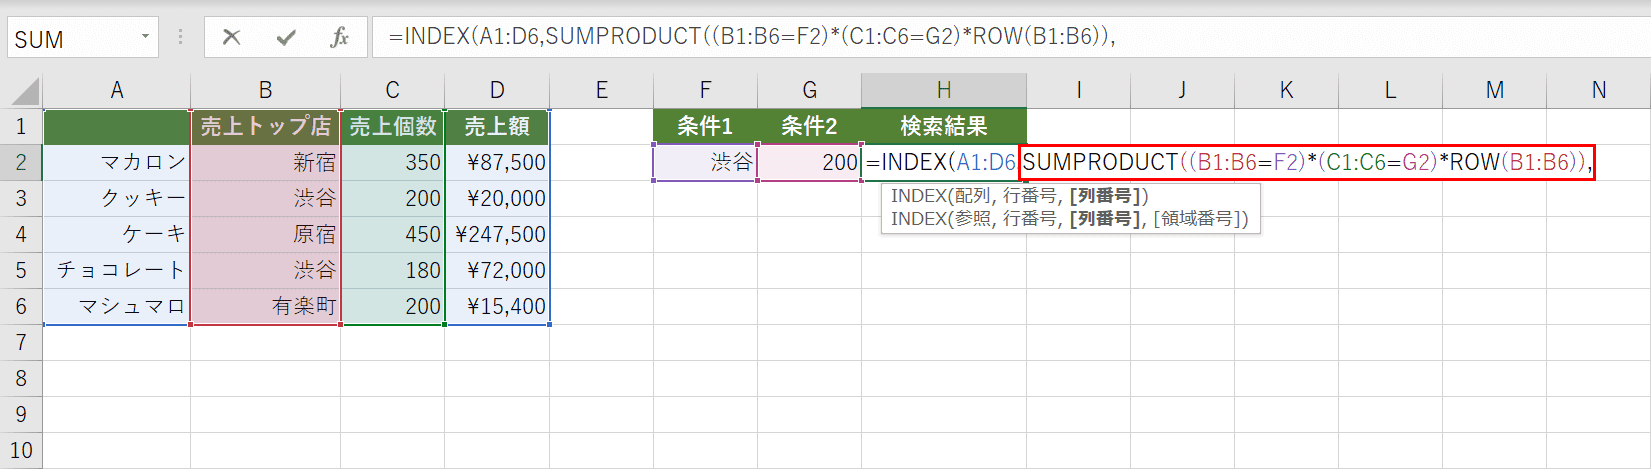 SUMPRODUCT関数の入力